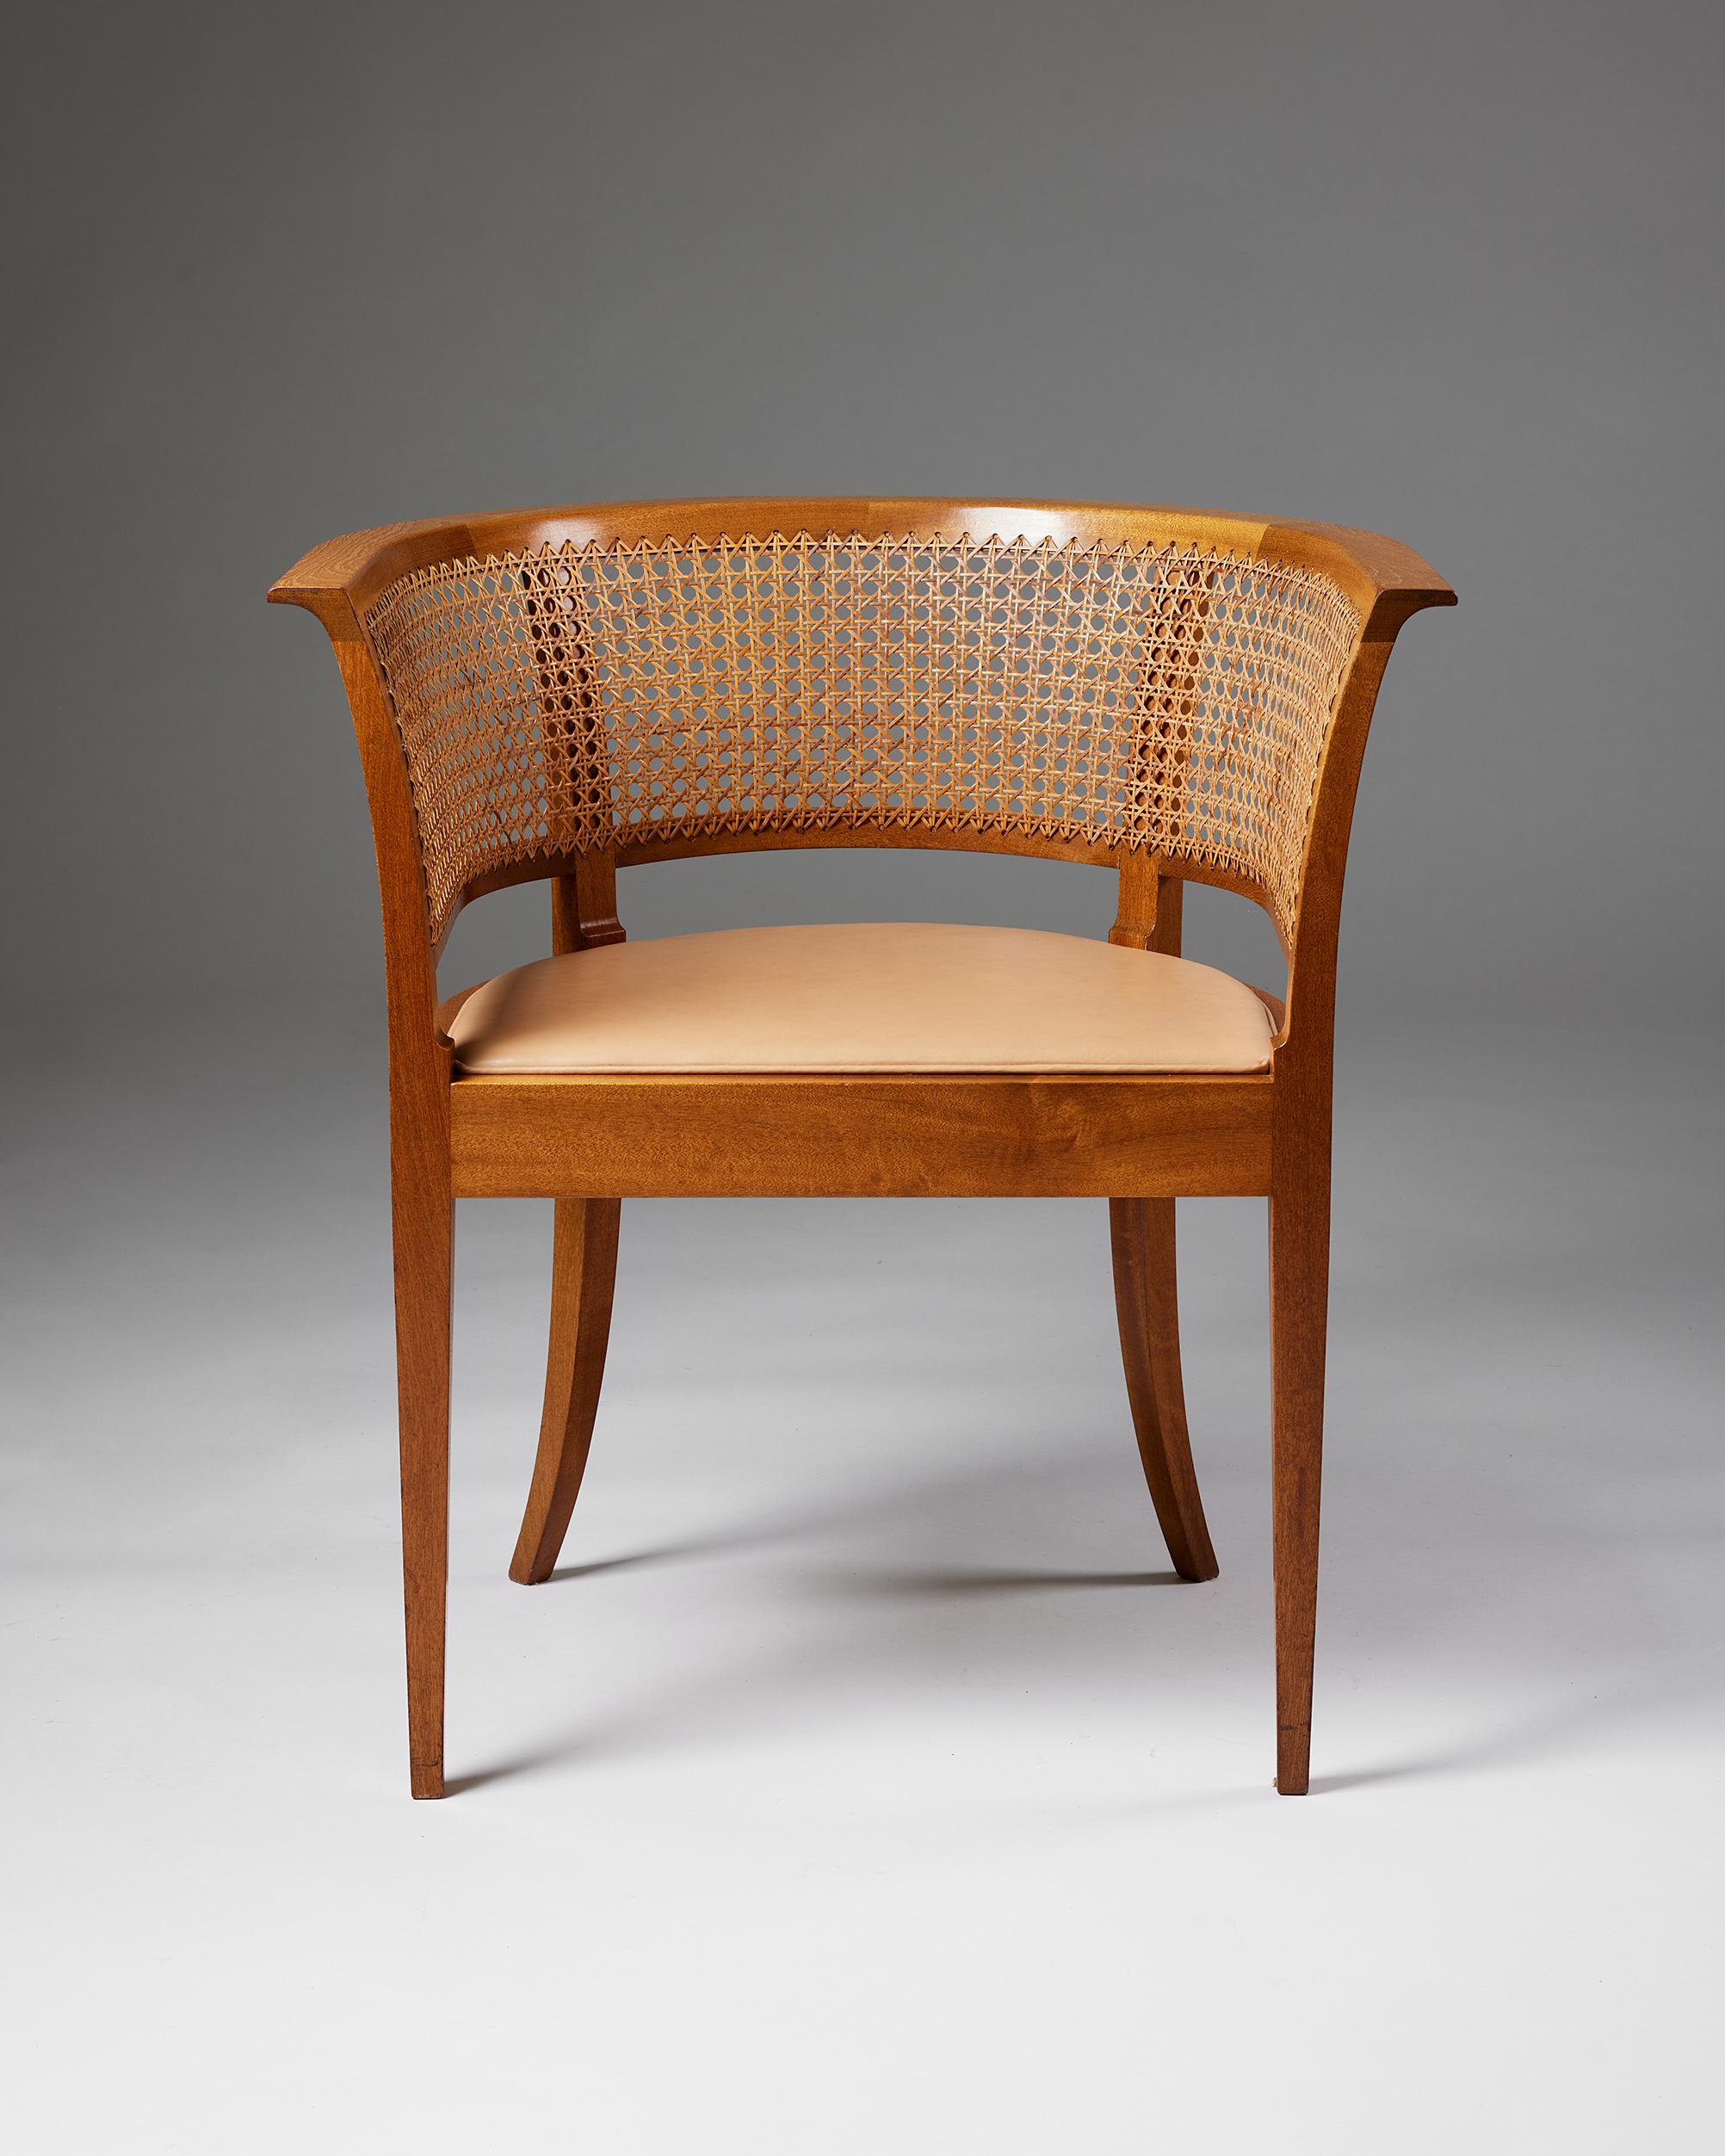 ‘The Faaborg Chair’ designed by Kaare Klint for Rud. Rasmussen Cabinetmakers,
Denmark, 1914.
Mahogany, woven cane and leather.

Labelled with the manufacturer's label.

Designed in 1914 for the Faaborg Museum. This example was made in the